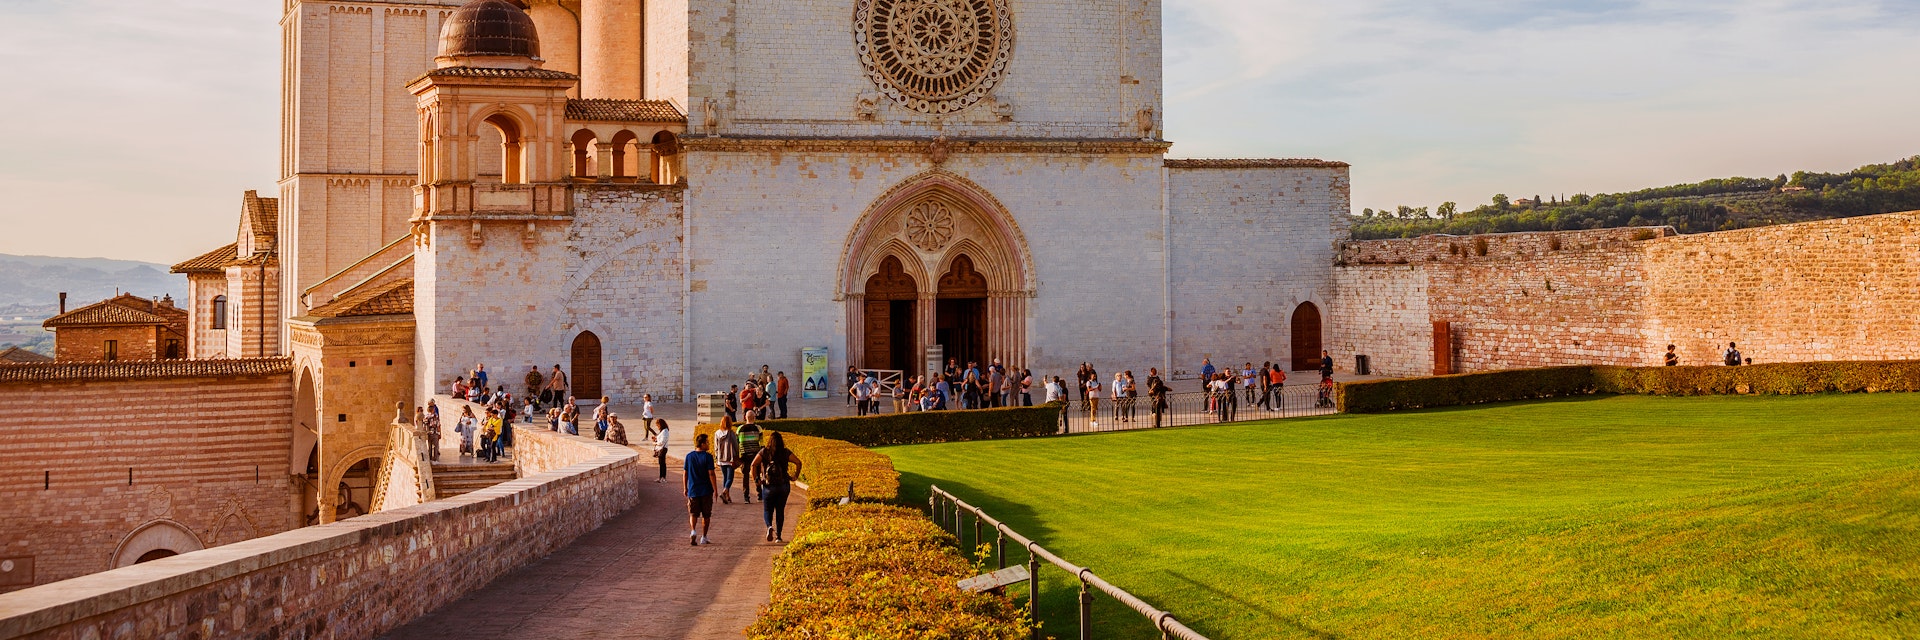 OCTOBER 23, 2019: Exterior of the Basilica of Saint Francis of Assisi in Umbria during sunset.